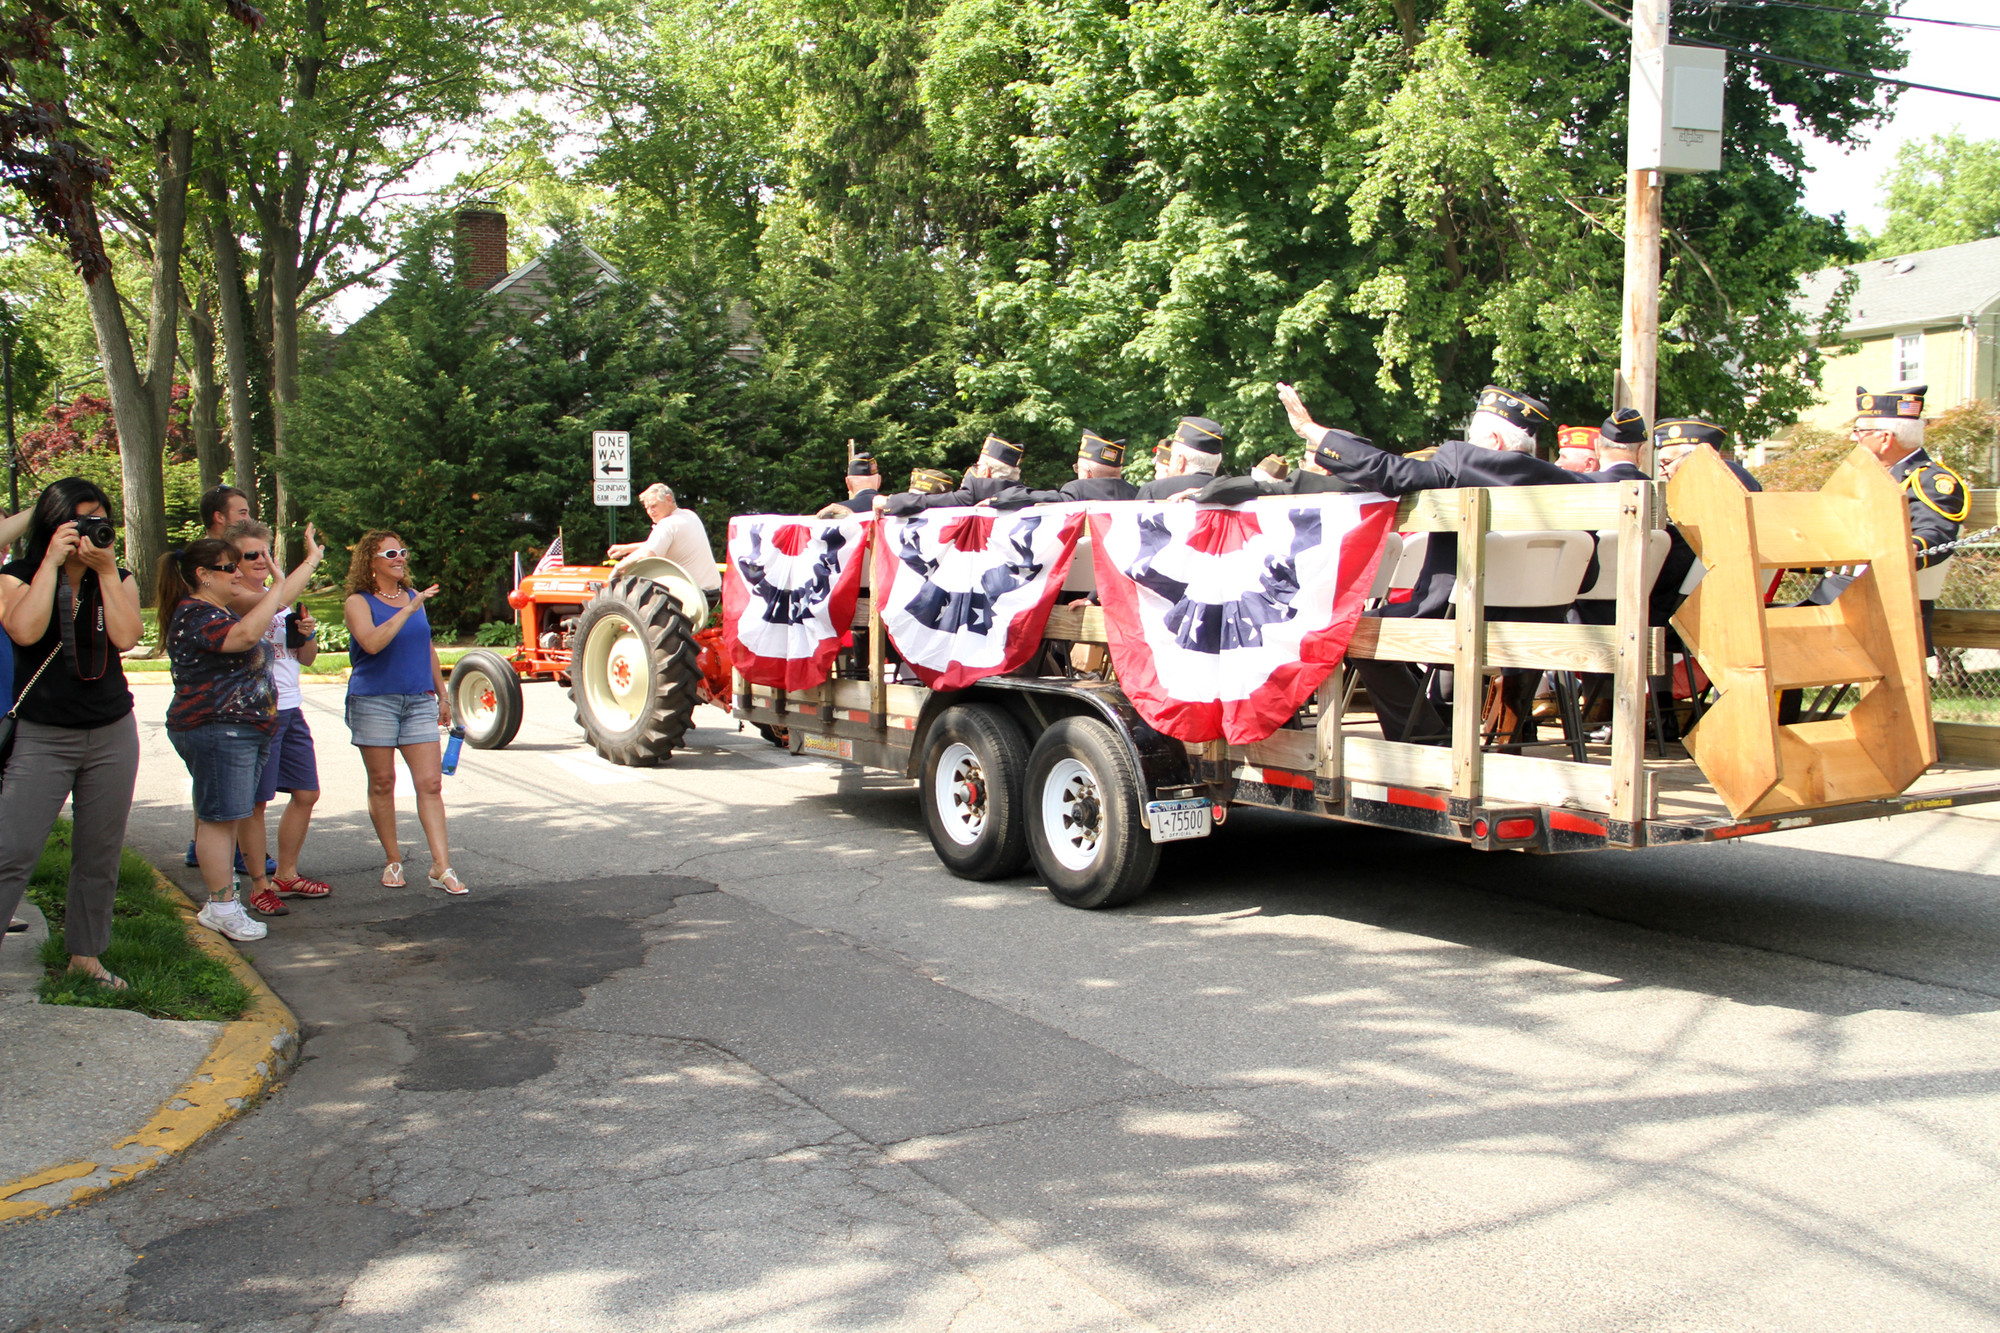 Malverne residents cheer as the Vets make their way thru the parade route.